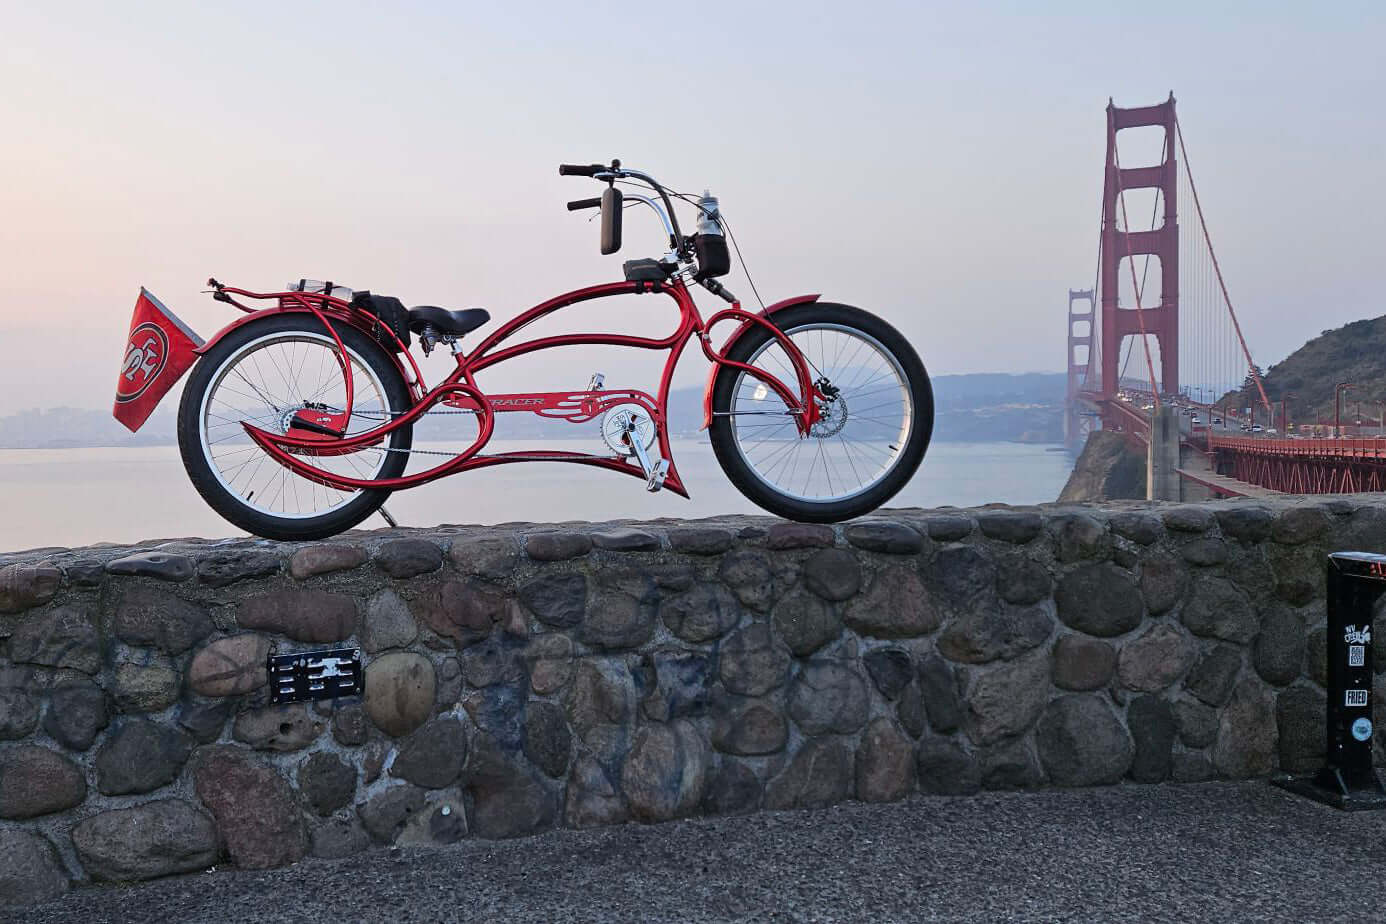 Ride in Style, Ride for Miles: The Long-Distance Appeal of Cruiser Bikes